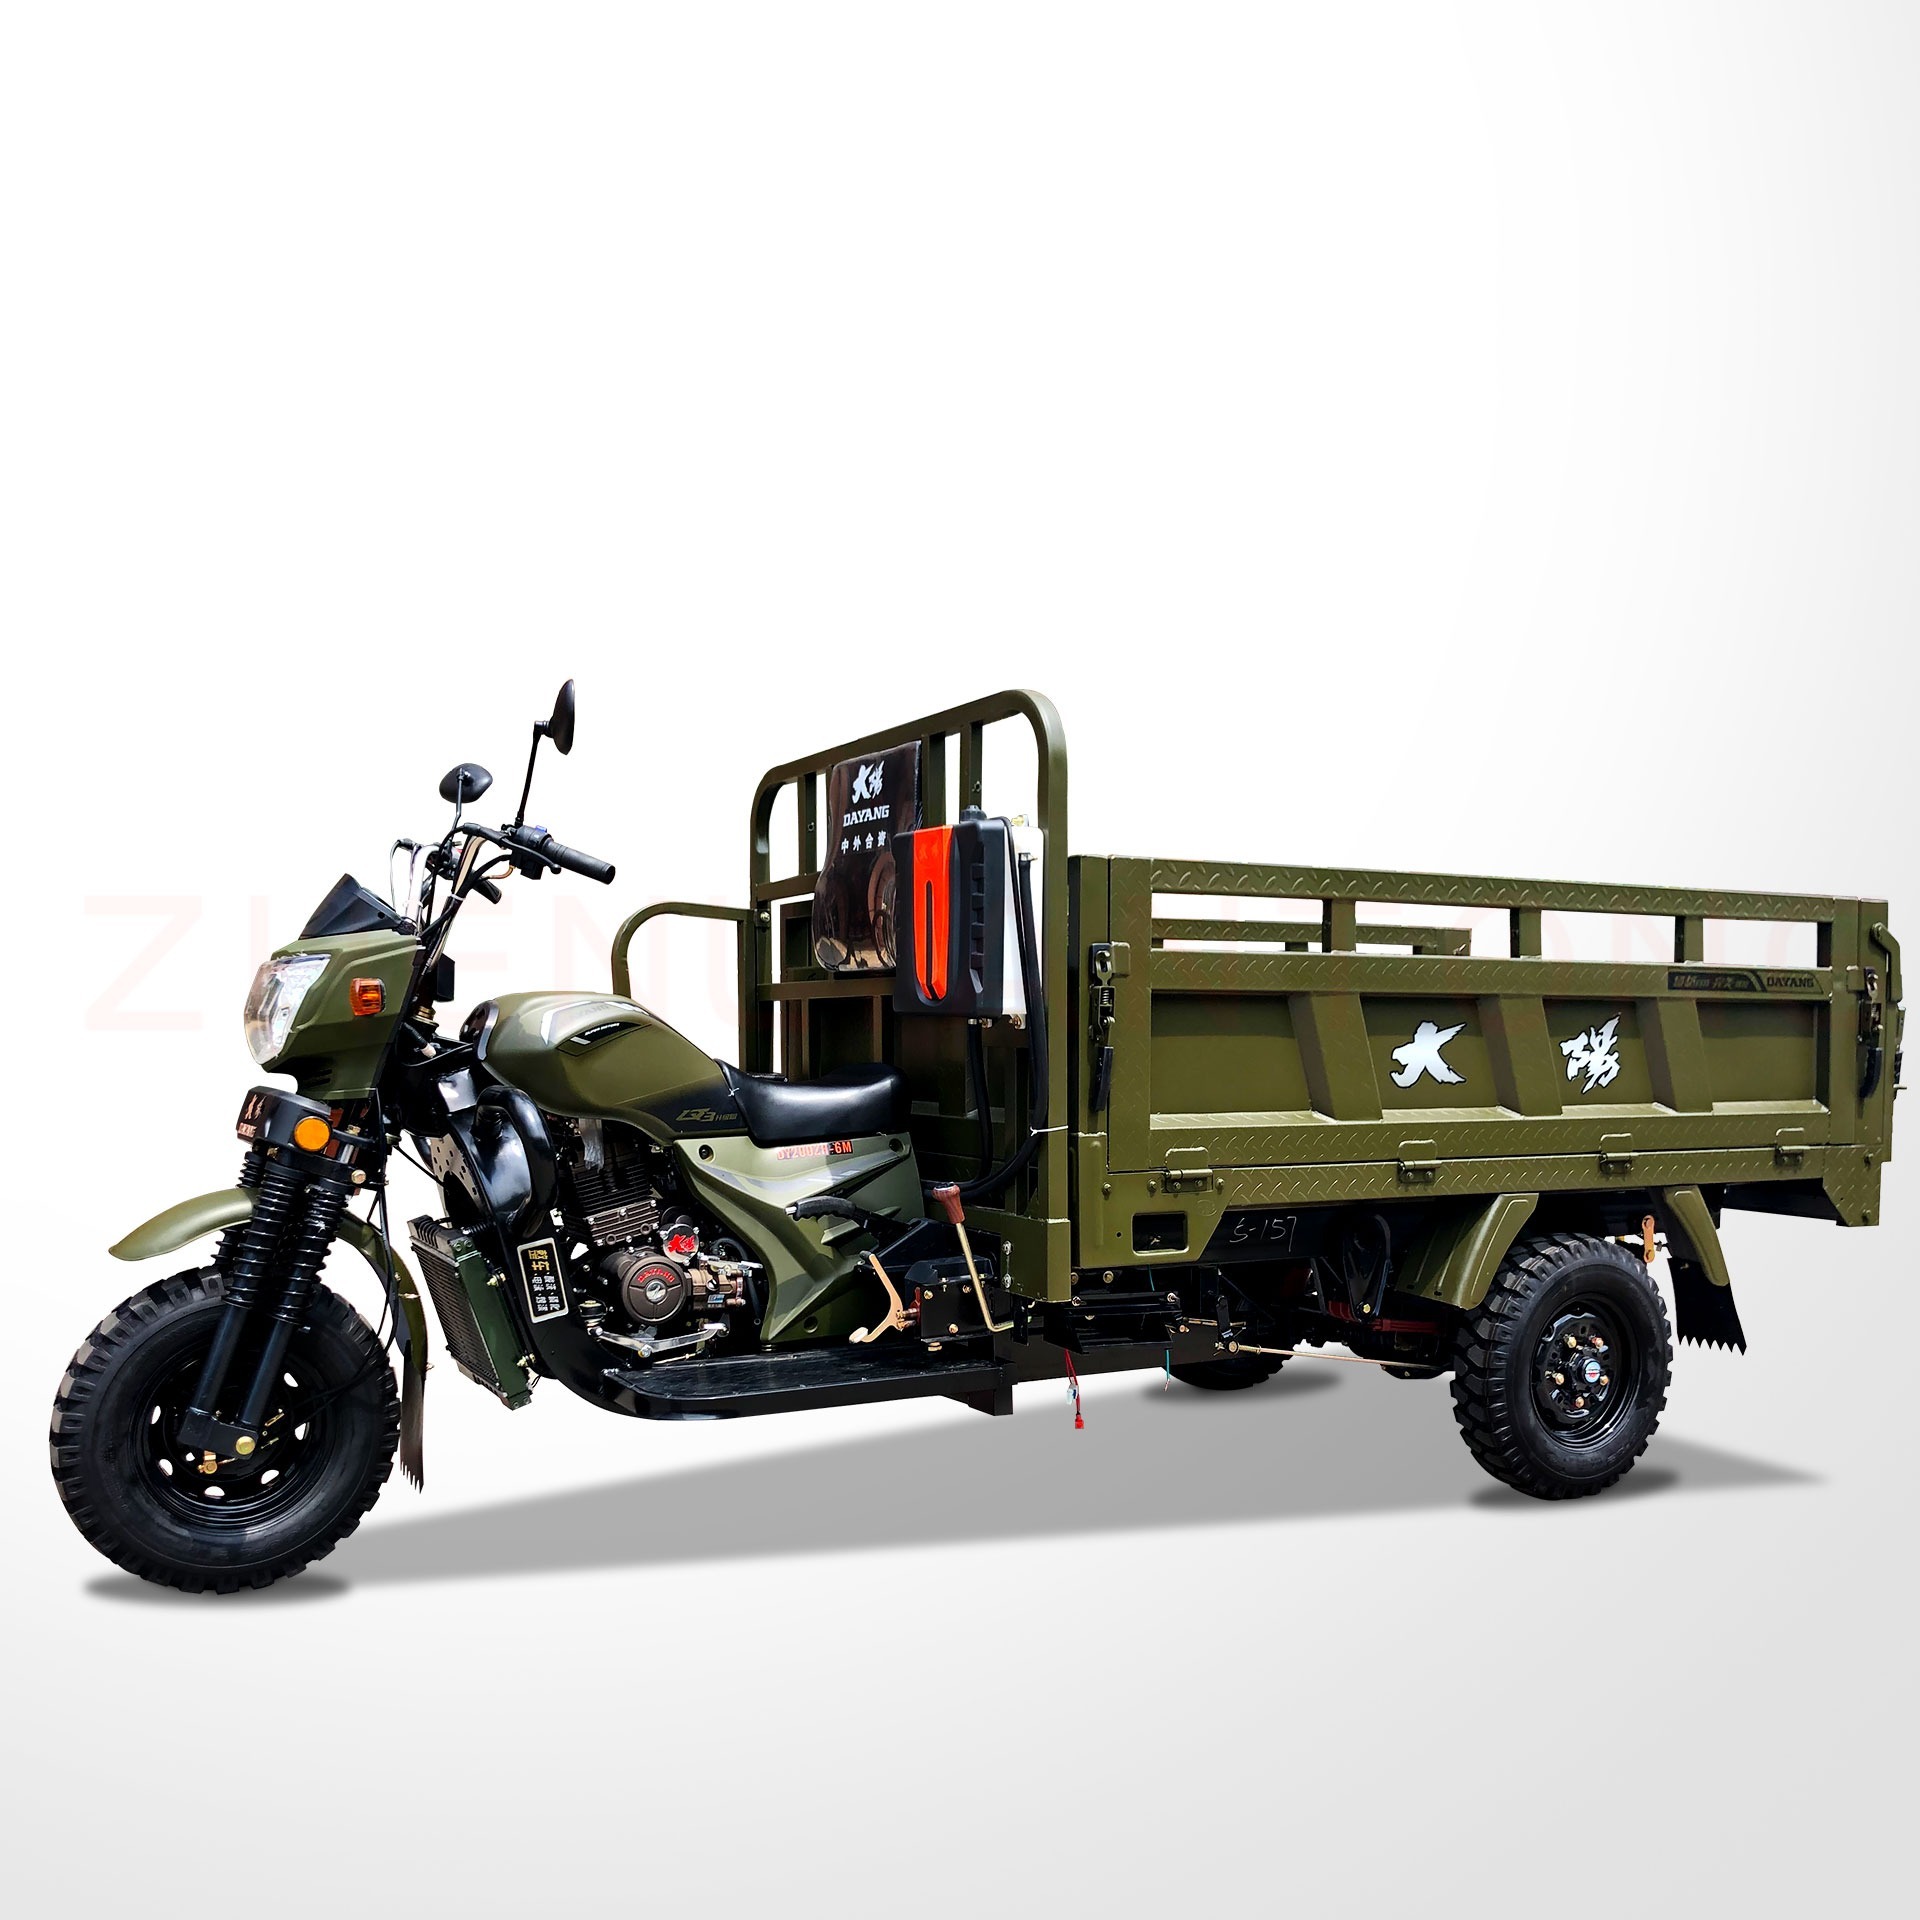 Tricycle Cargo Truck 3 Wheel Motorcycle